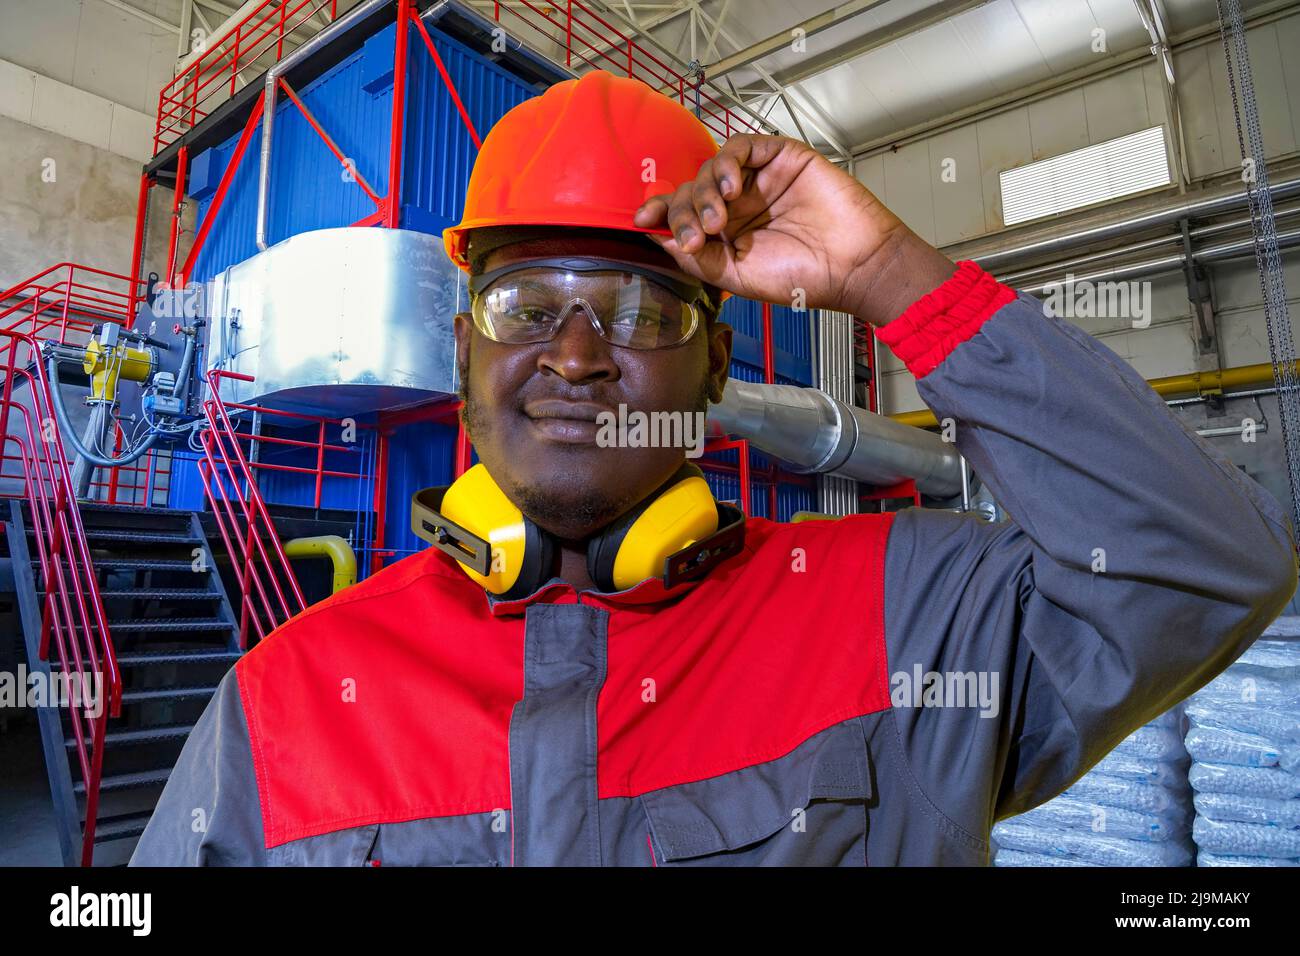 Black Industrial Worker In Red Helmet, Protective Eyewear, Hearing  Protection Equpiment And Work Uniform Looking At Camera Stock Photo - Alamy